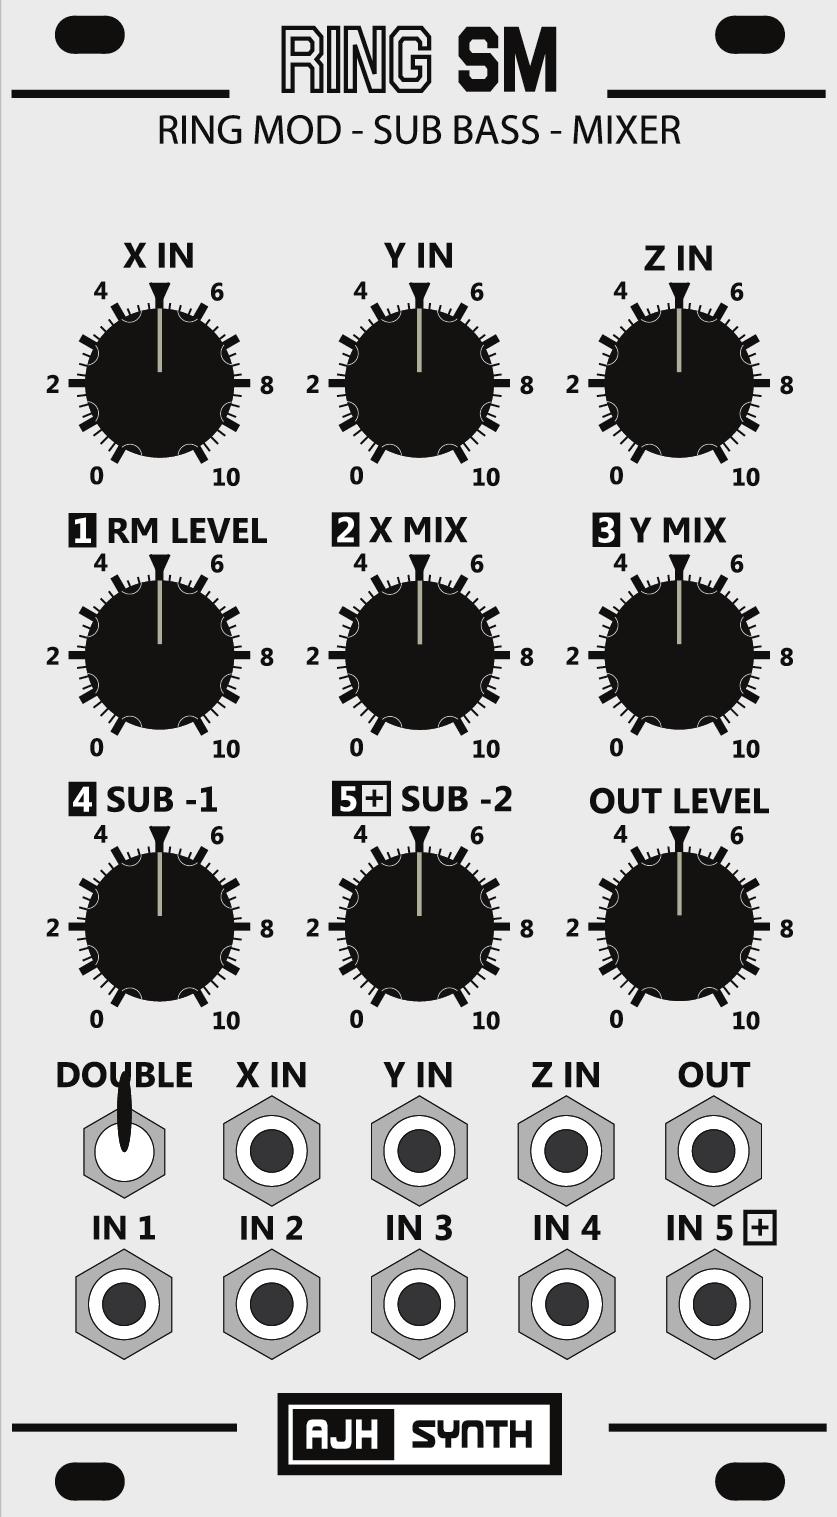 Controls, Inputs and Outputs 2 Y Input Level Z Input Level 3 1 X Input Level 4 RM Output Level (Mixer Channel 1 Level) 7 Sub -1 Level (Mixer Channel 4 Level) 11 X Input Jack 10 Freq.